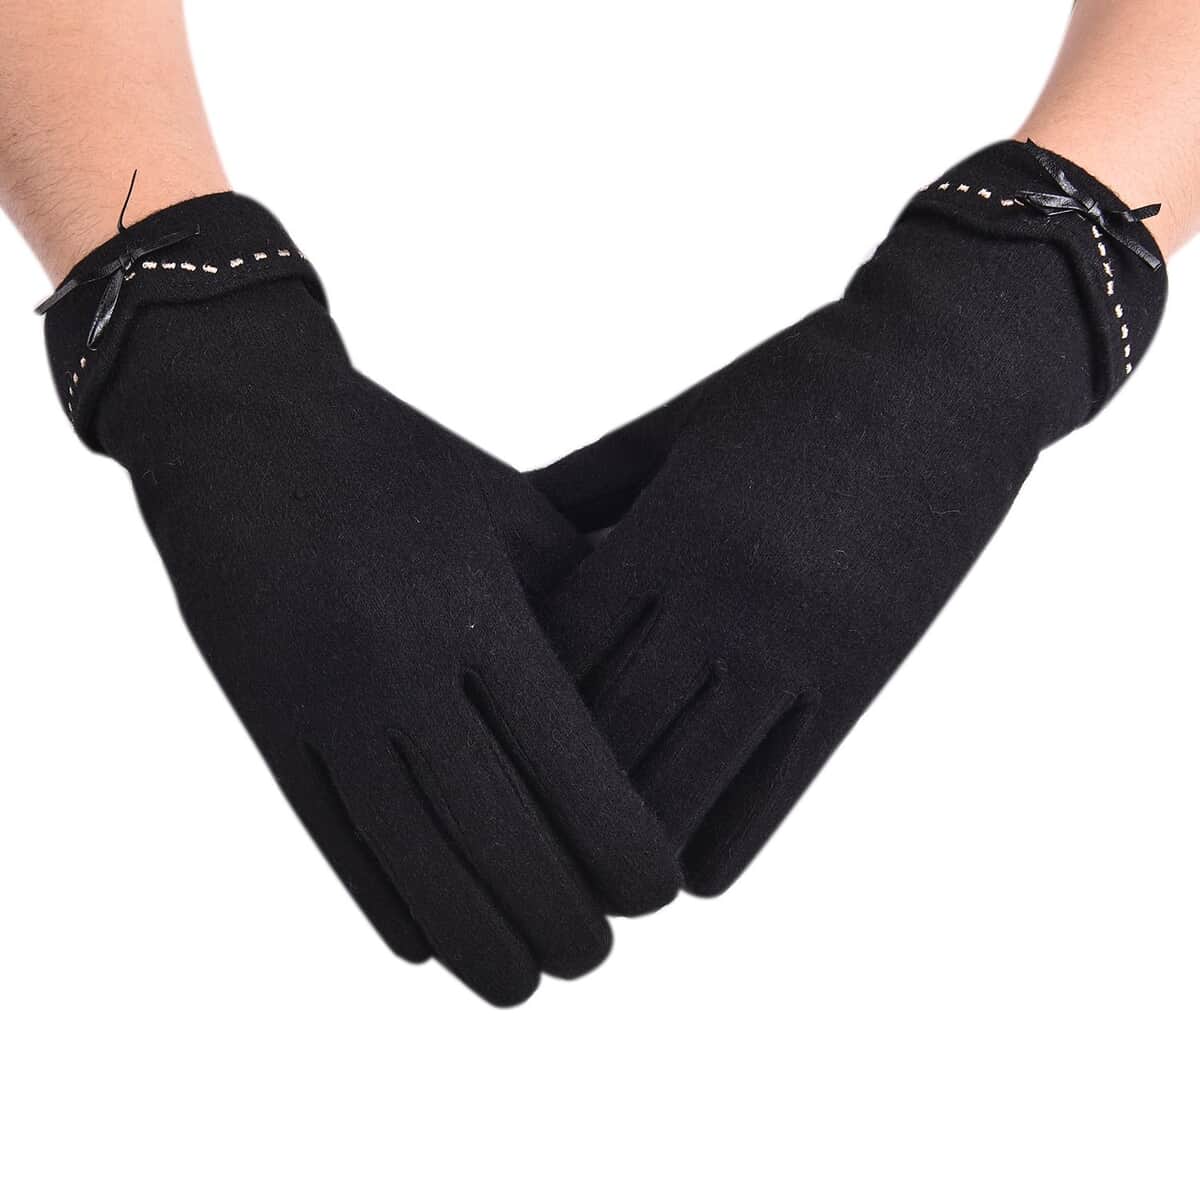 Black Cashmere Warm Gloves with Bowknot and Equipped Touch Screen Friendly (9.05"x3.54") image number 0